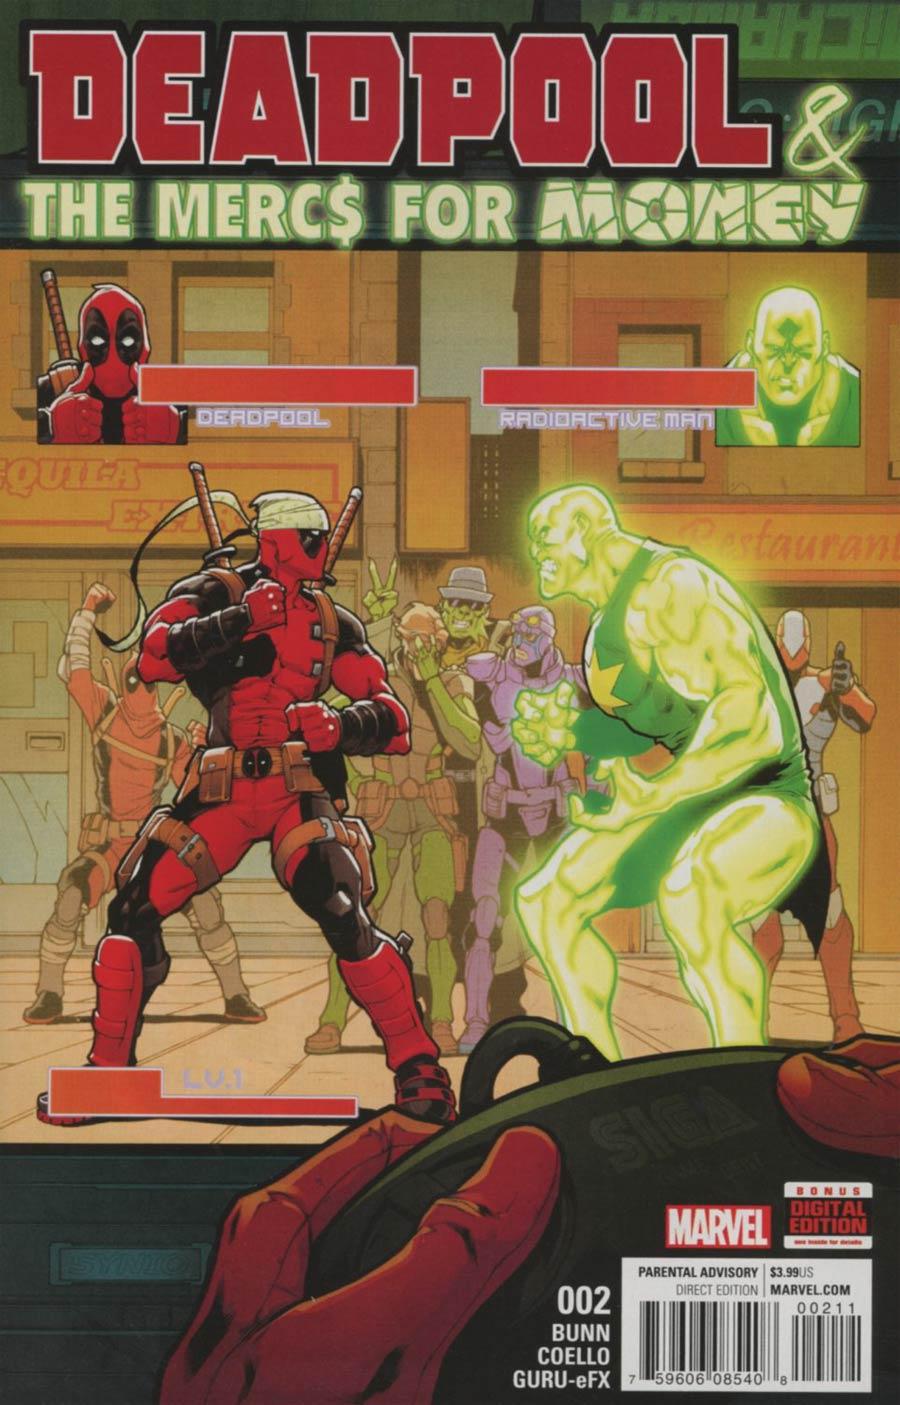 Deadpool And The Mercs For Money Vol. 2 #2